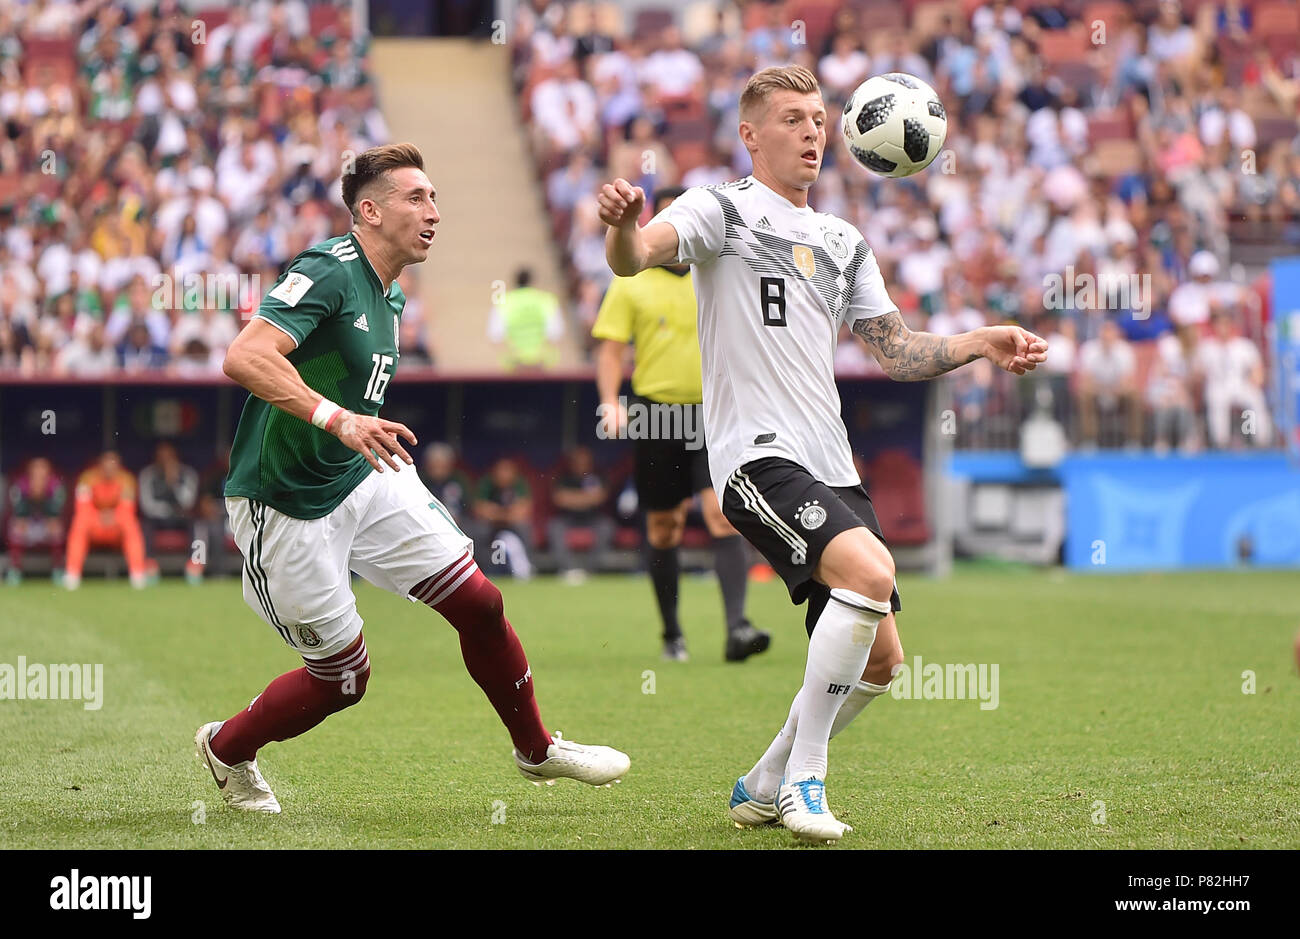 MOSCOW, RUSSIA - JUNE 17: Hector Herrera of Mexico competes with Toni Kroos of Germany during the 2018 FIFA World Cup Russia group F match between Germany and Mexico at Luzhniki Stadium on June 17, 2018 in Moscow, Russia. (Photo by Lukasz Laskowski/PressFocus/MB Media) Stock Photo